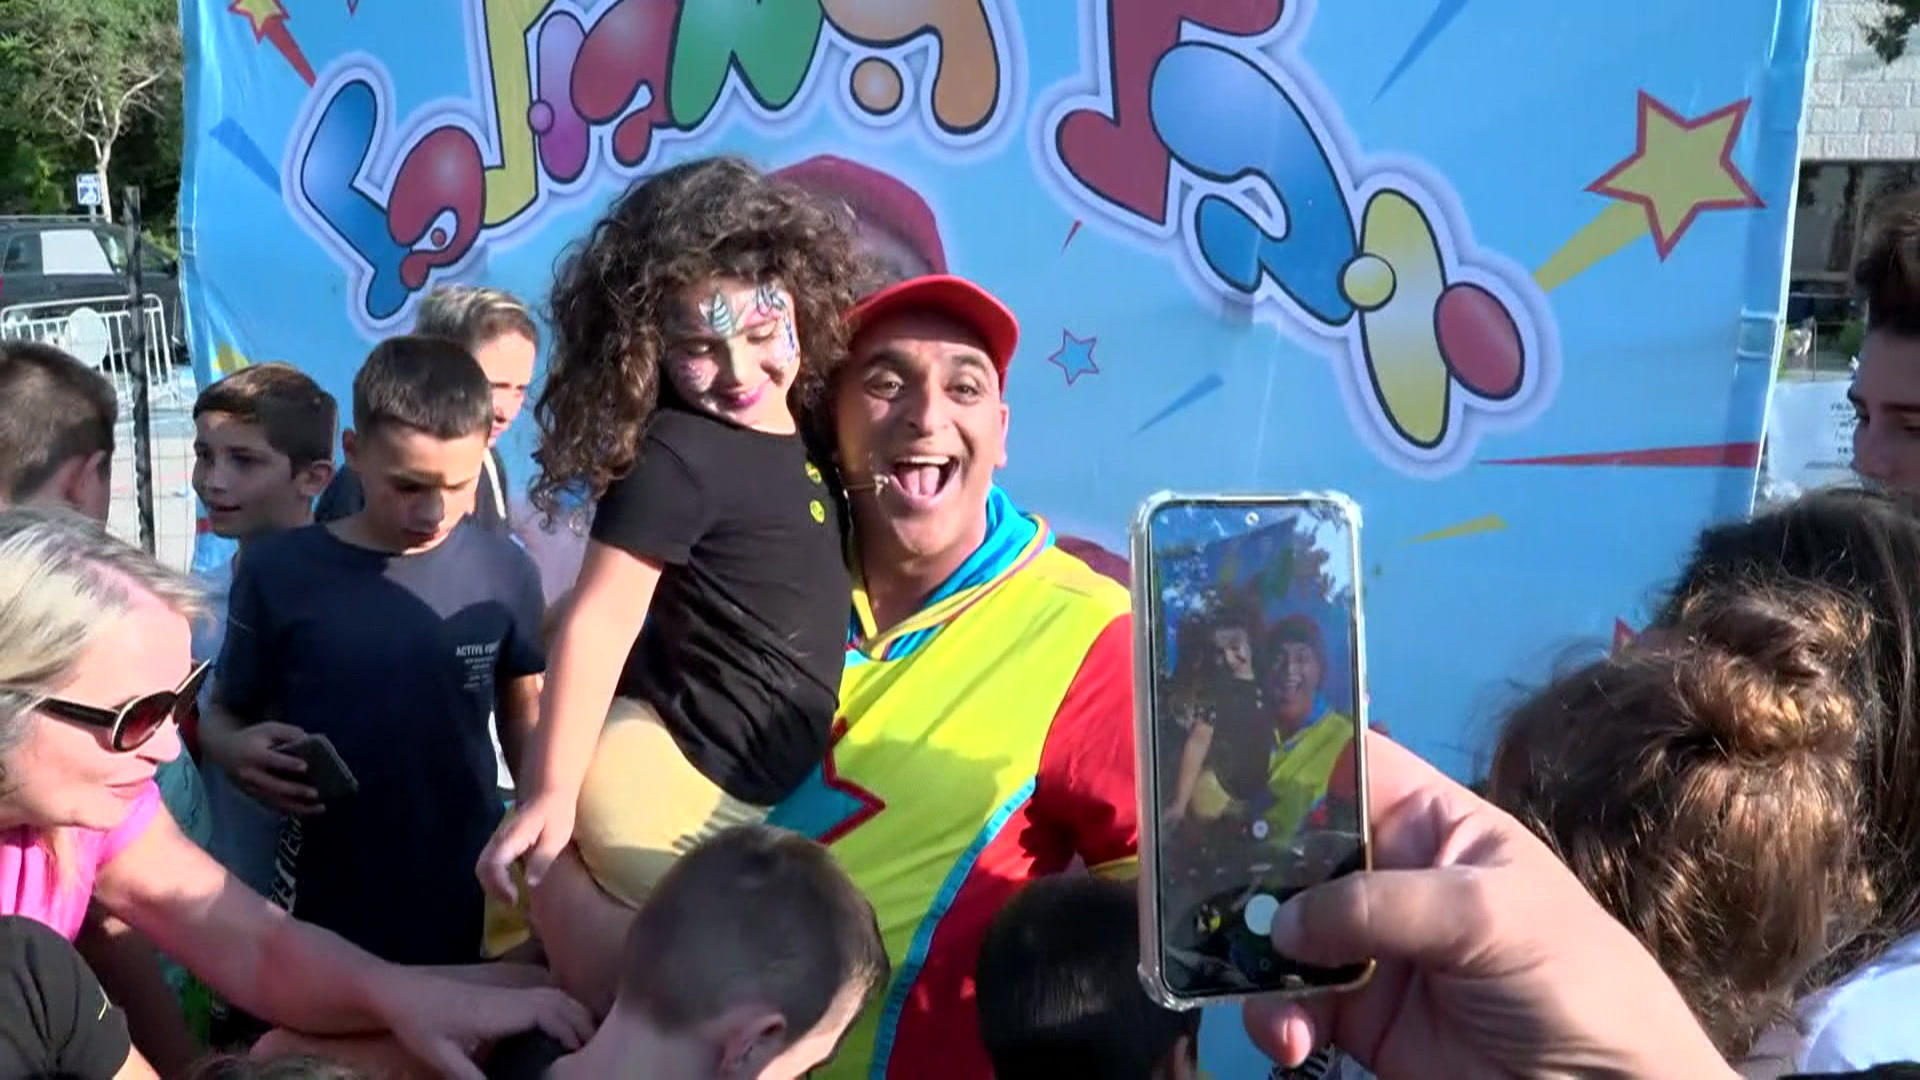 Clown Yuval is a ray of hope for traumatized children "But I'm crying inside"